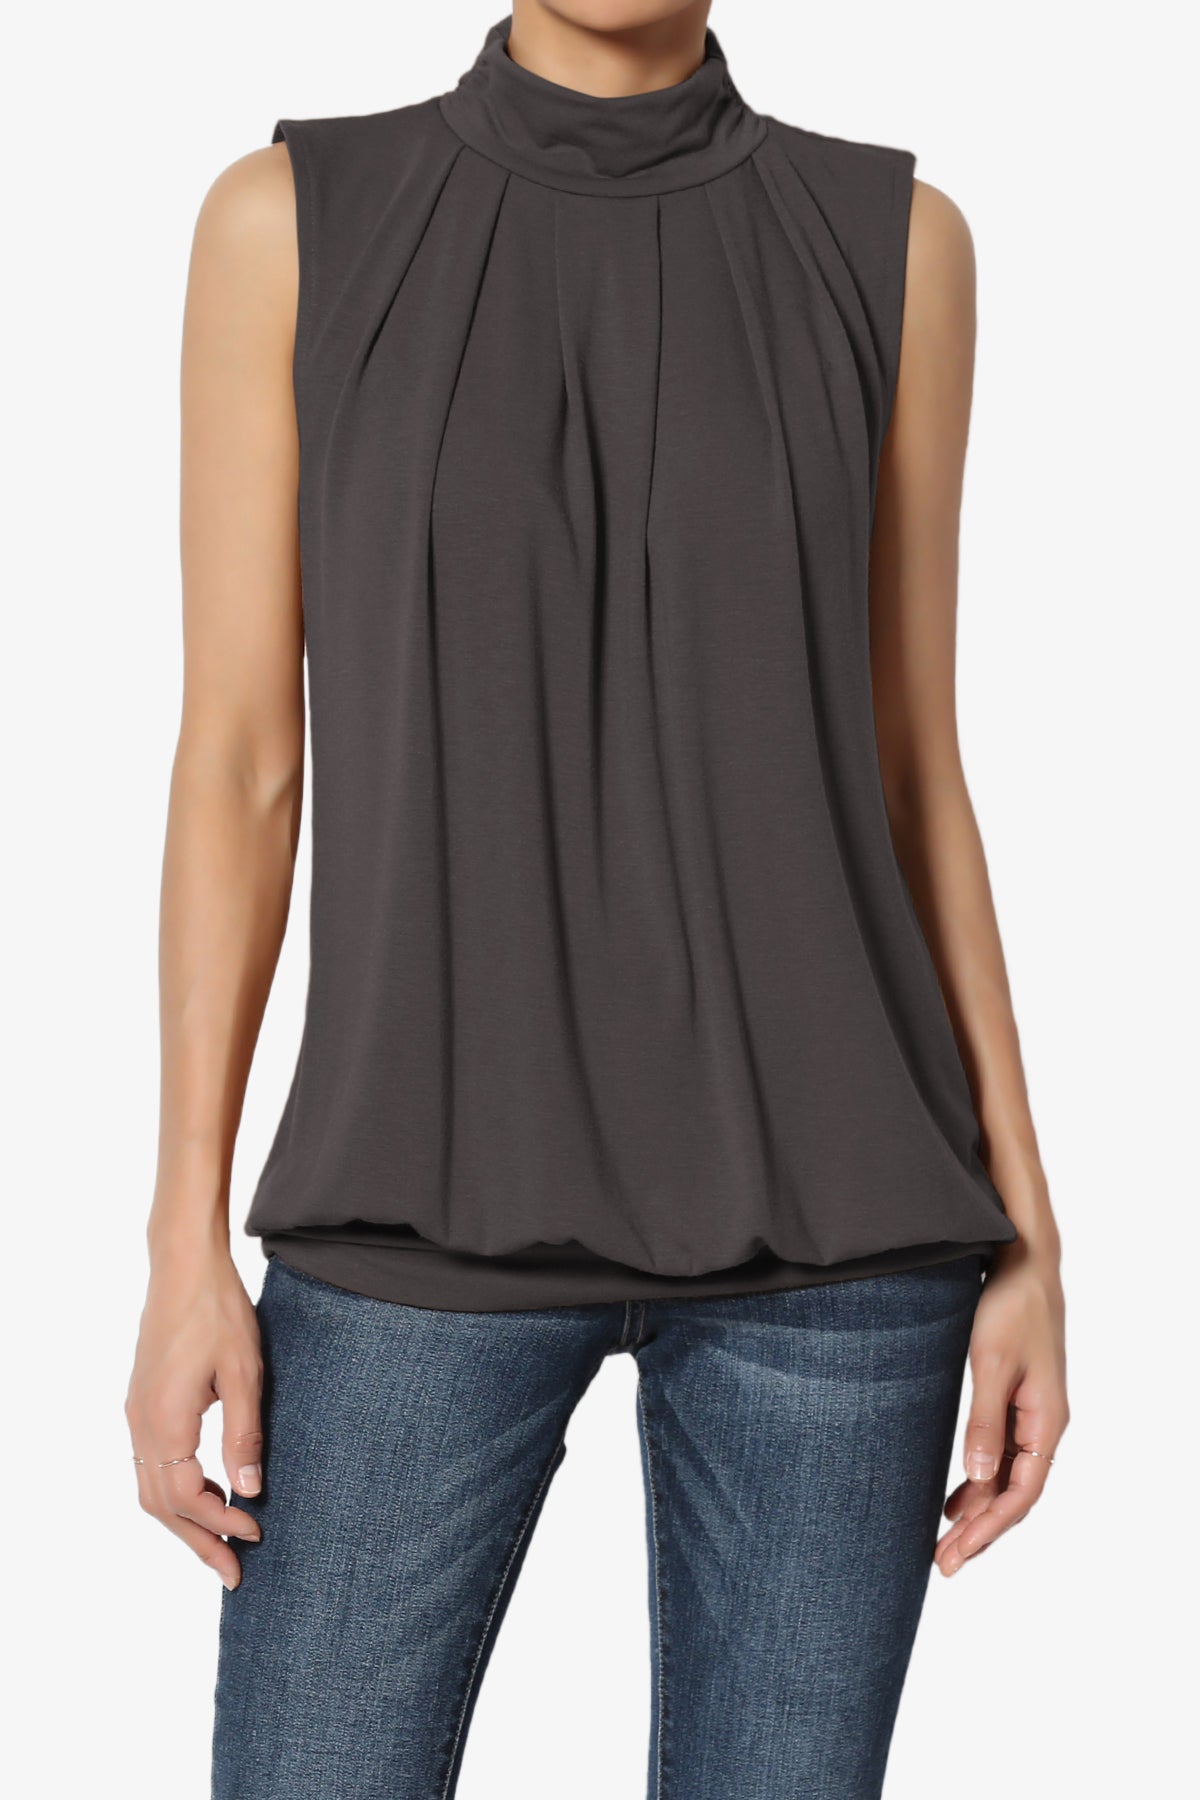 Load image into Gallery viewer, Jibbitz Sleeveless Mock Neck Pleated Top ASH GREY_1
